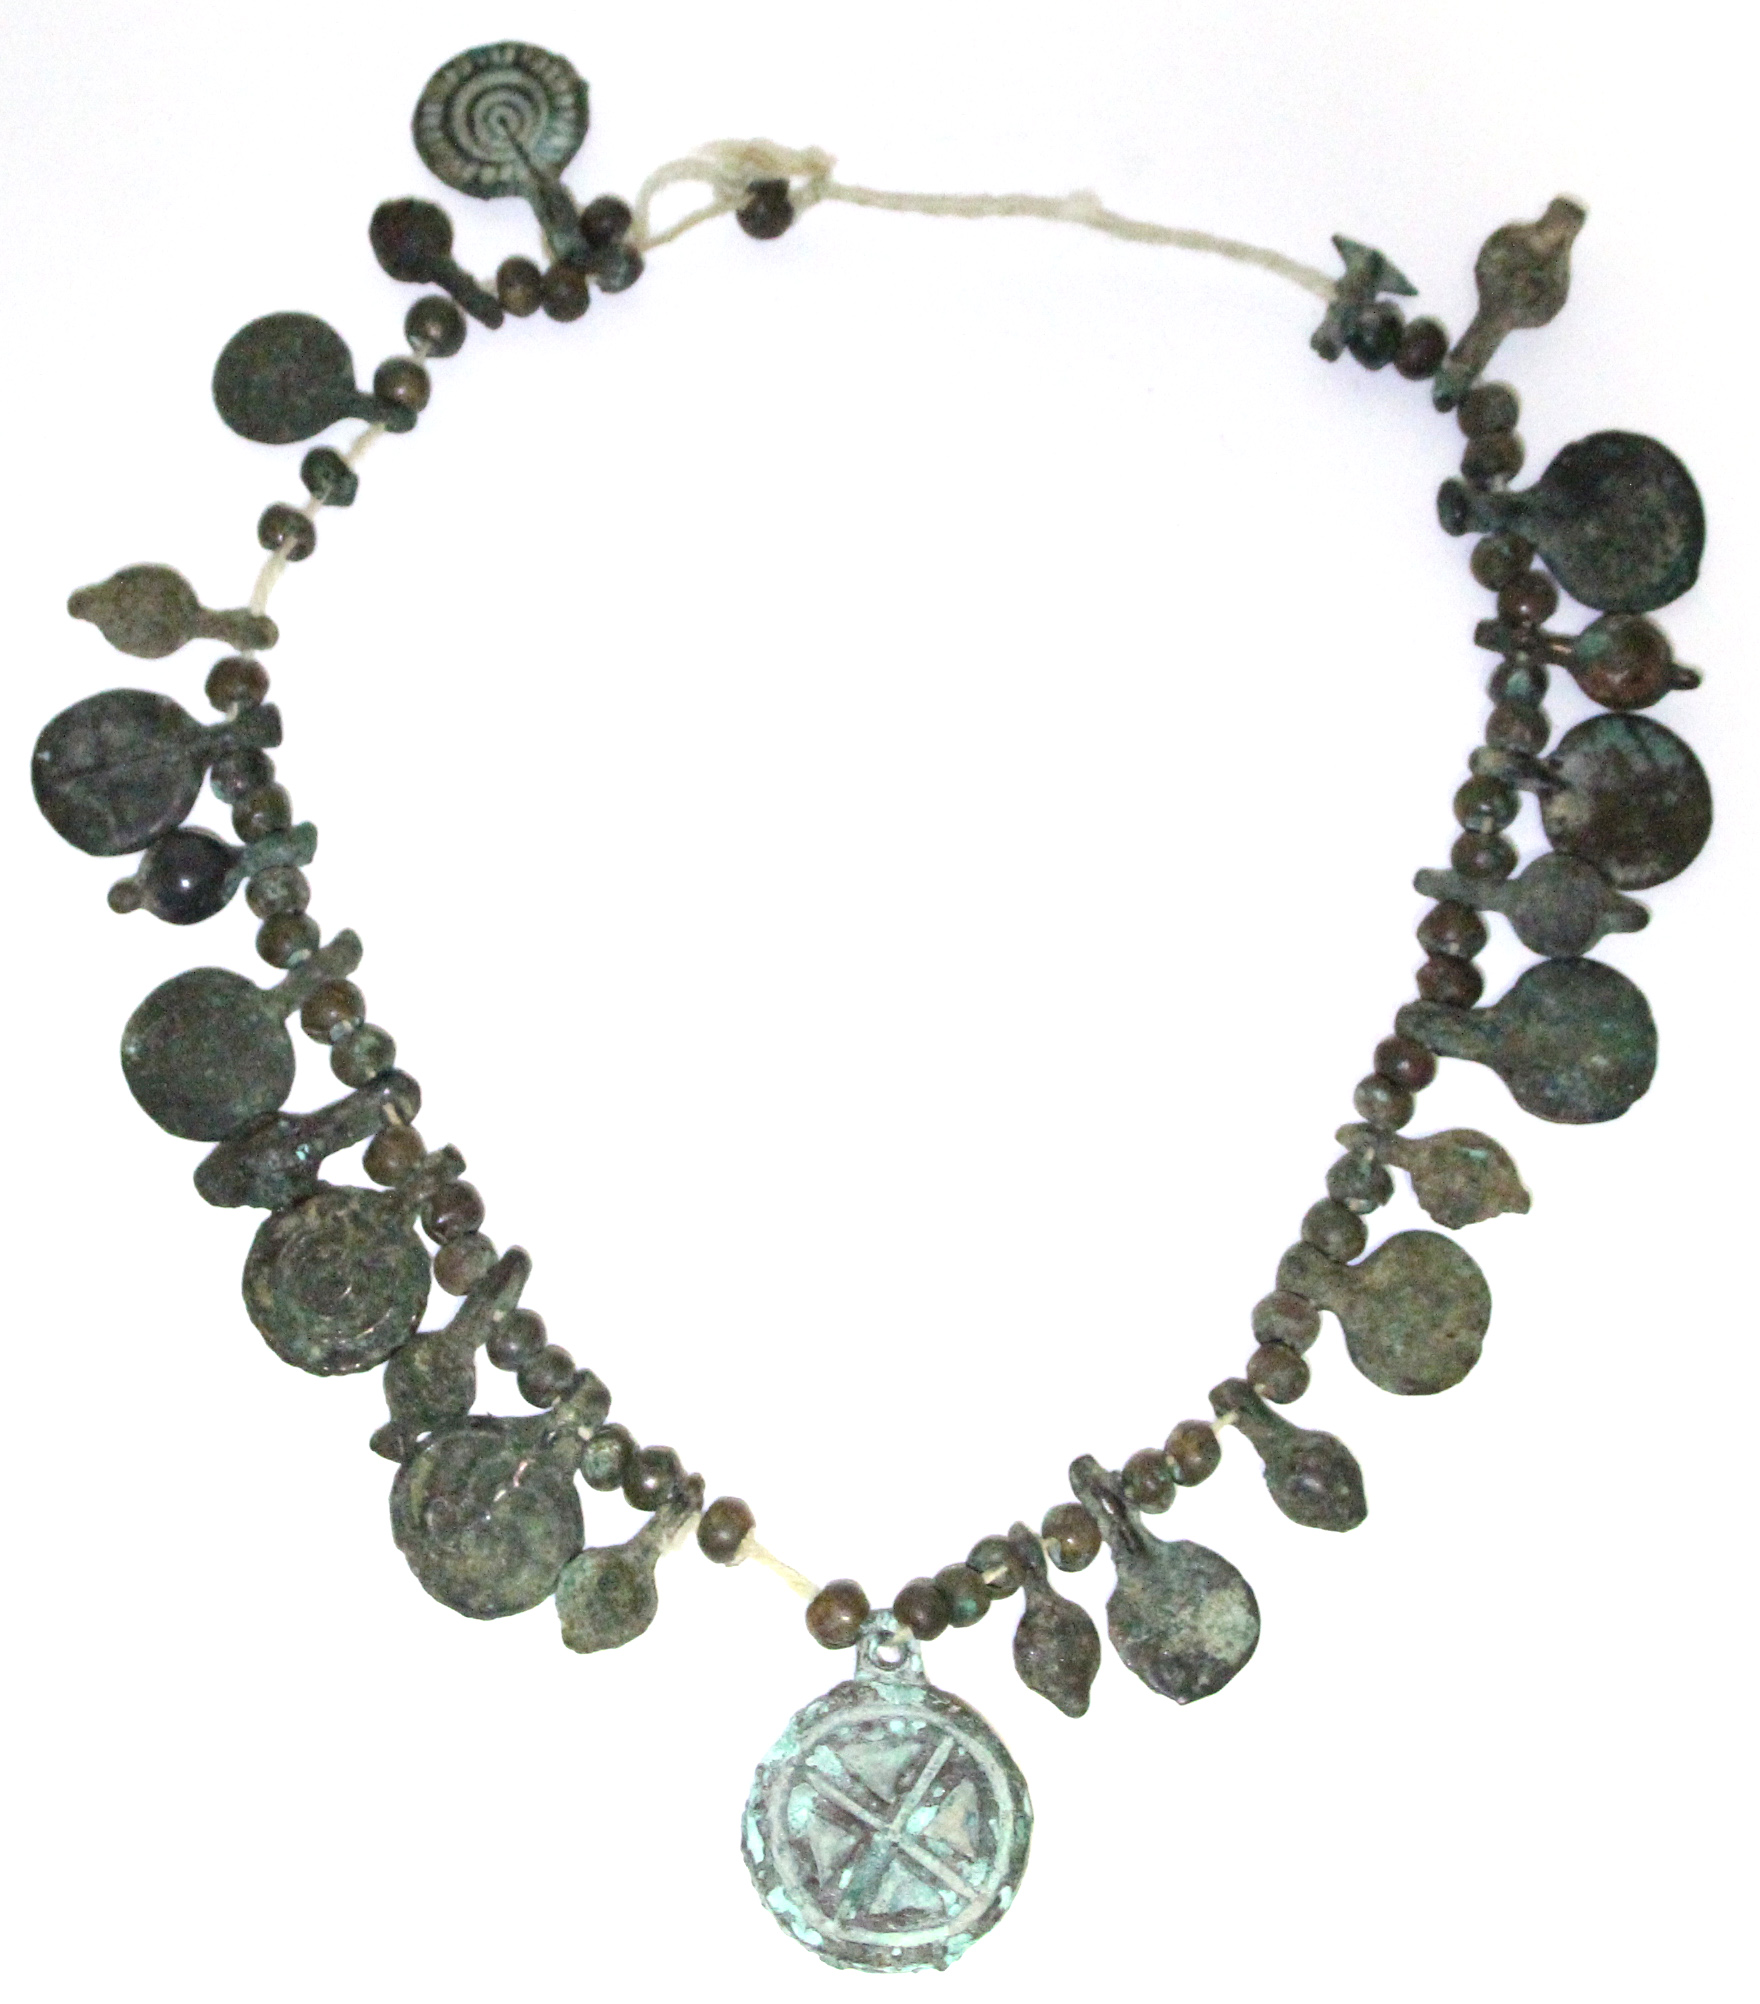 A Byzantine bronze necklace of decorated flat circular panels with small plain beads in between.